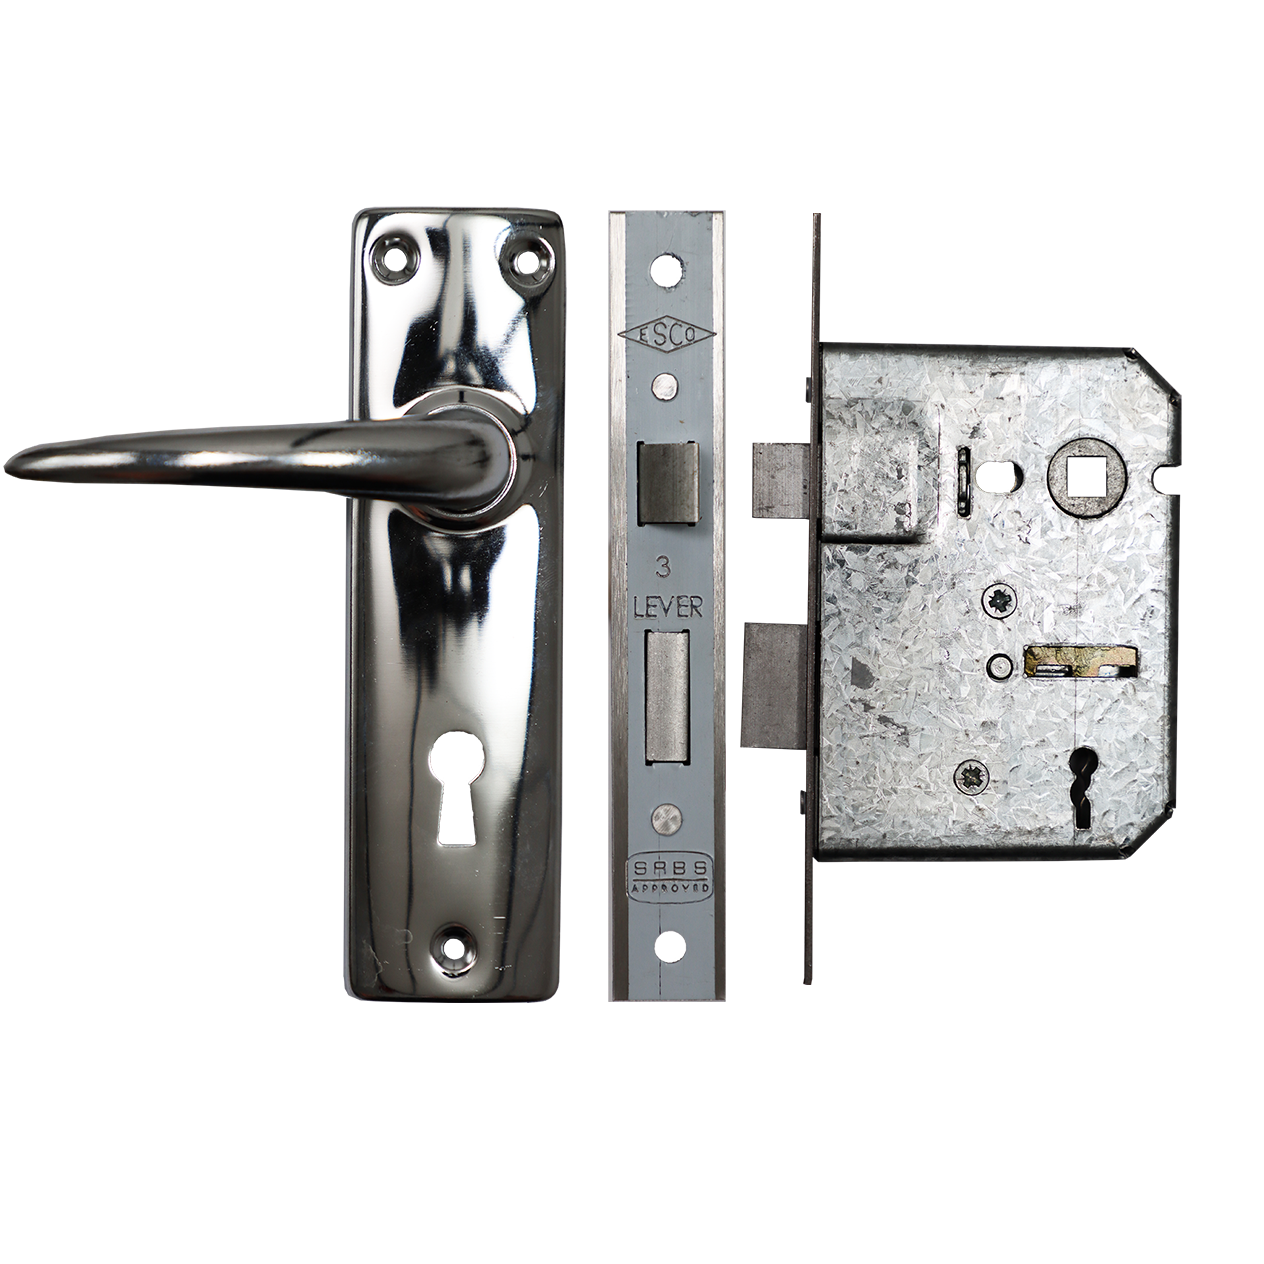 LOCKSET MORTICE 3 LEVER ESCO BOXED - CHROME PLATED HANDLES - MED SECURITY